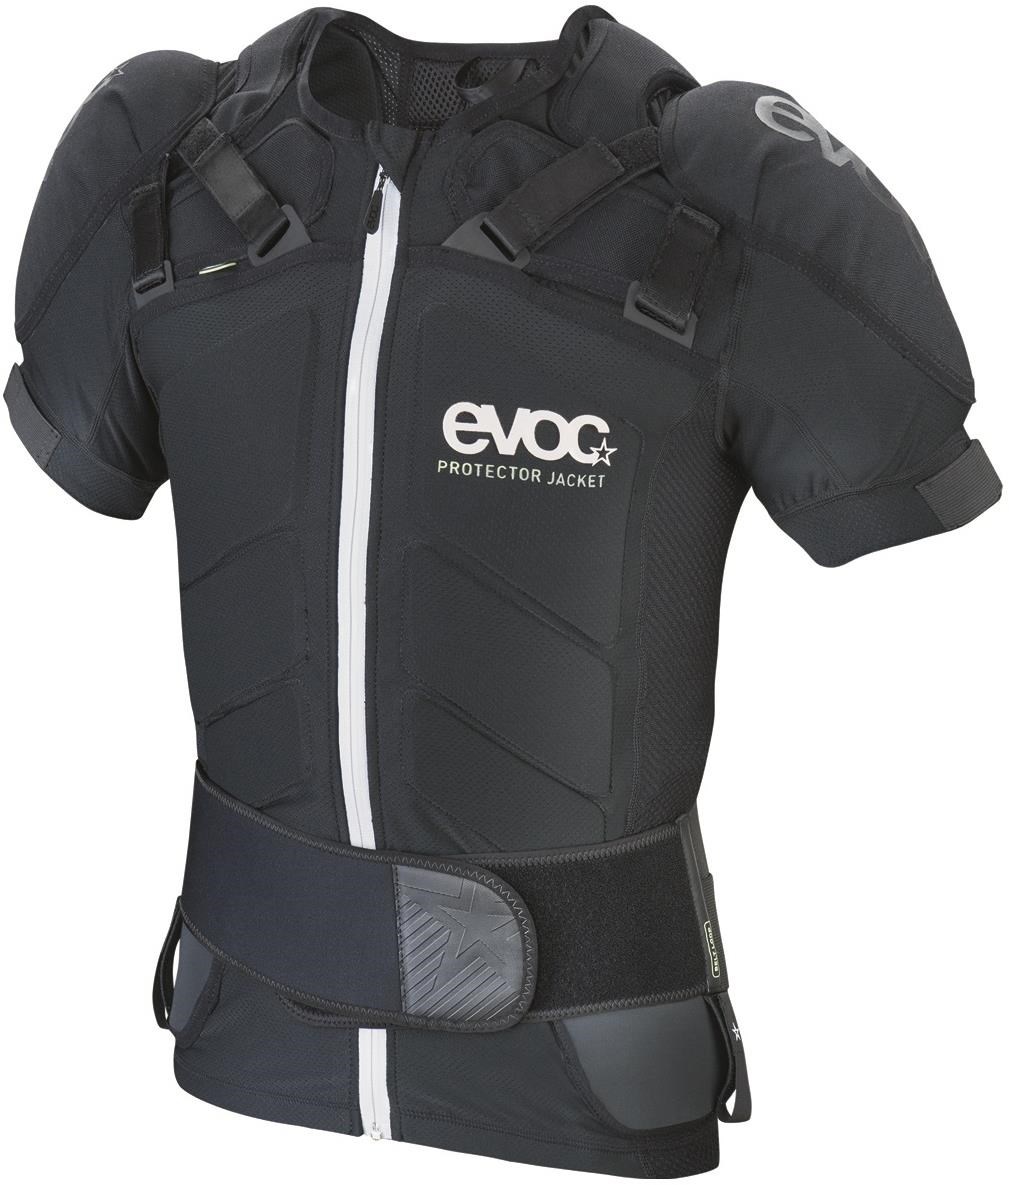 Evoc Protector Jacket Body Armour product image